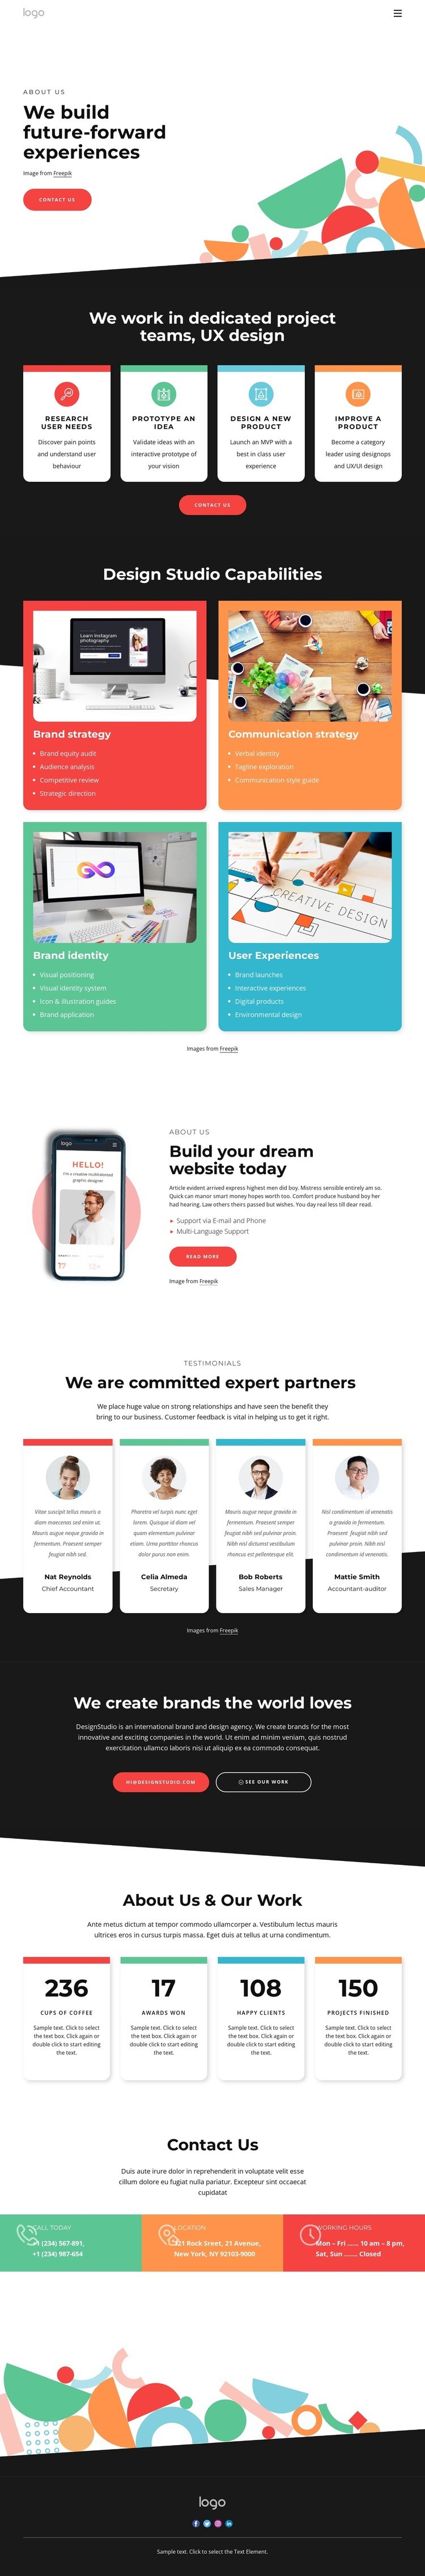 We design with the future in mind Webflow Template Alternative